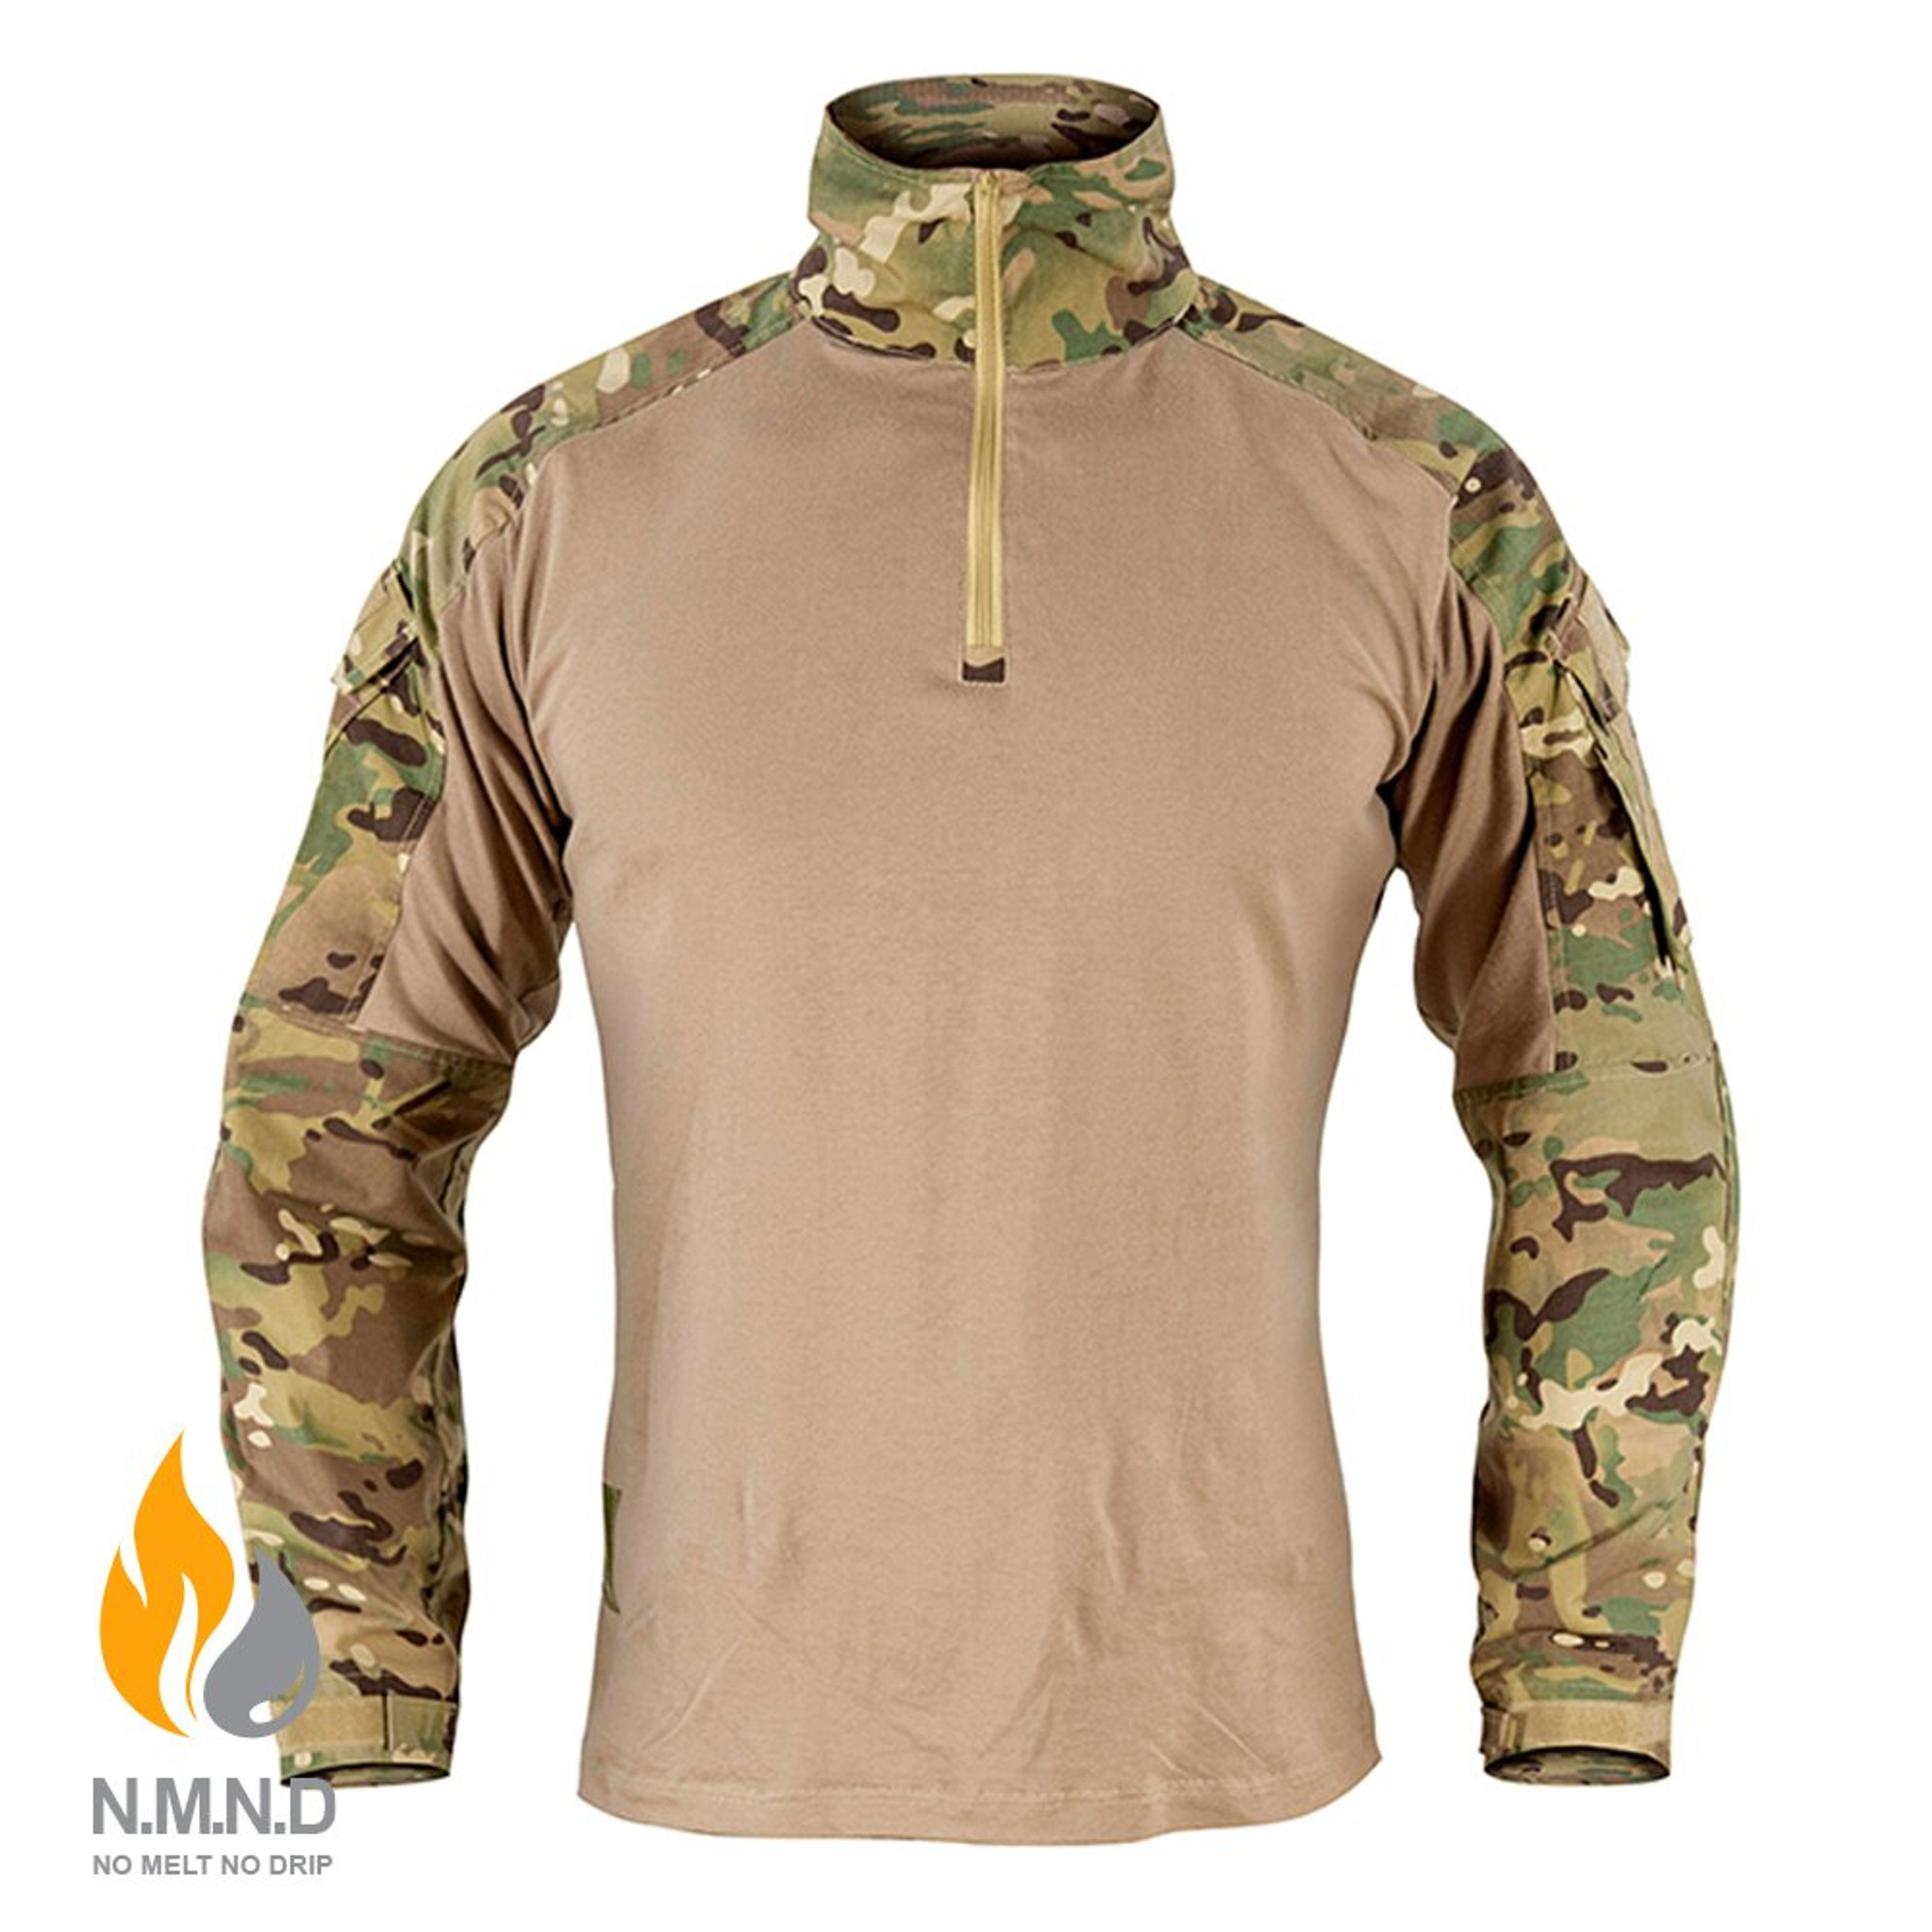 Frontline CPX Tactical Shirt NMND Multicam | Tactical Shop